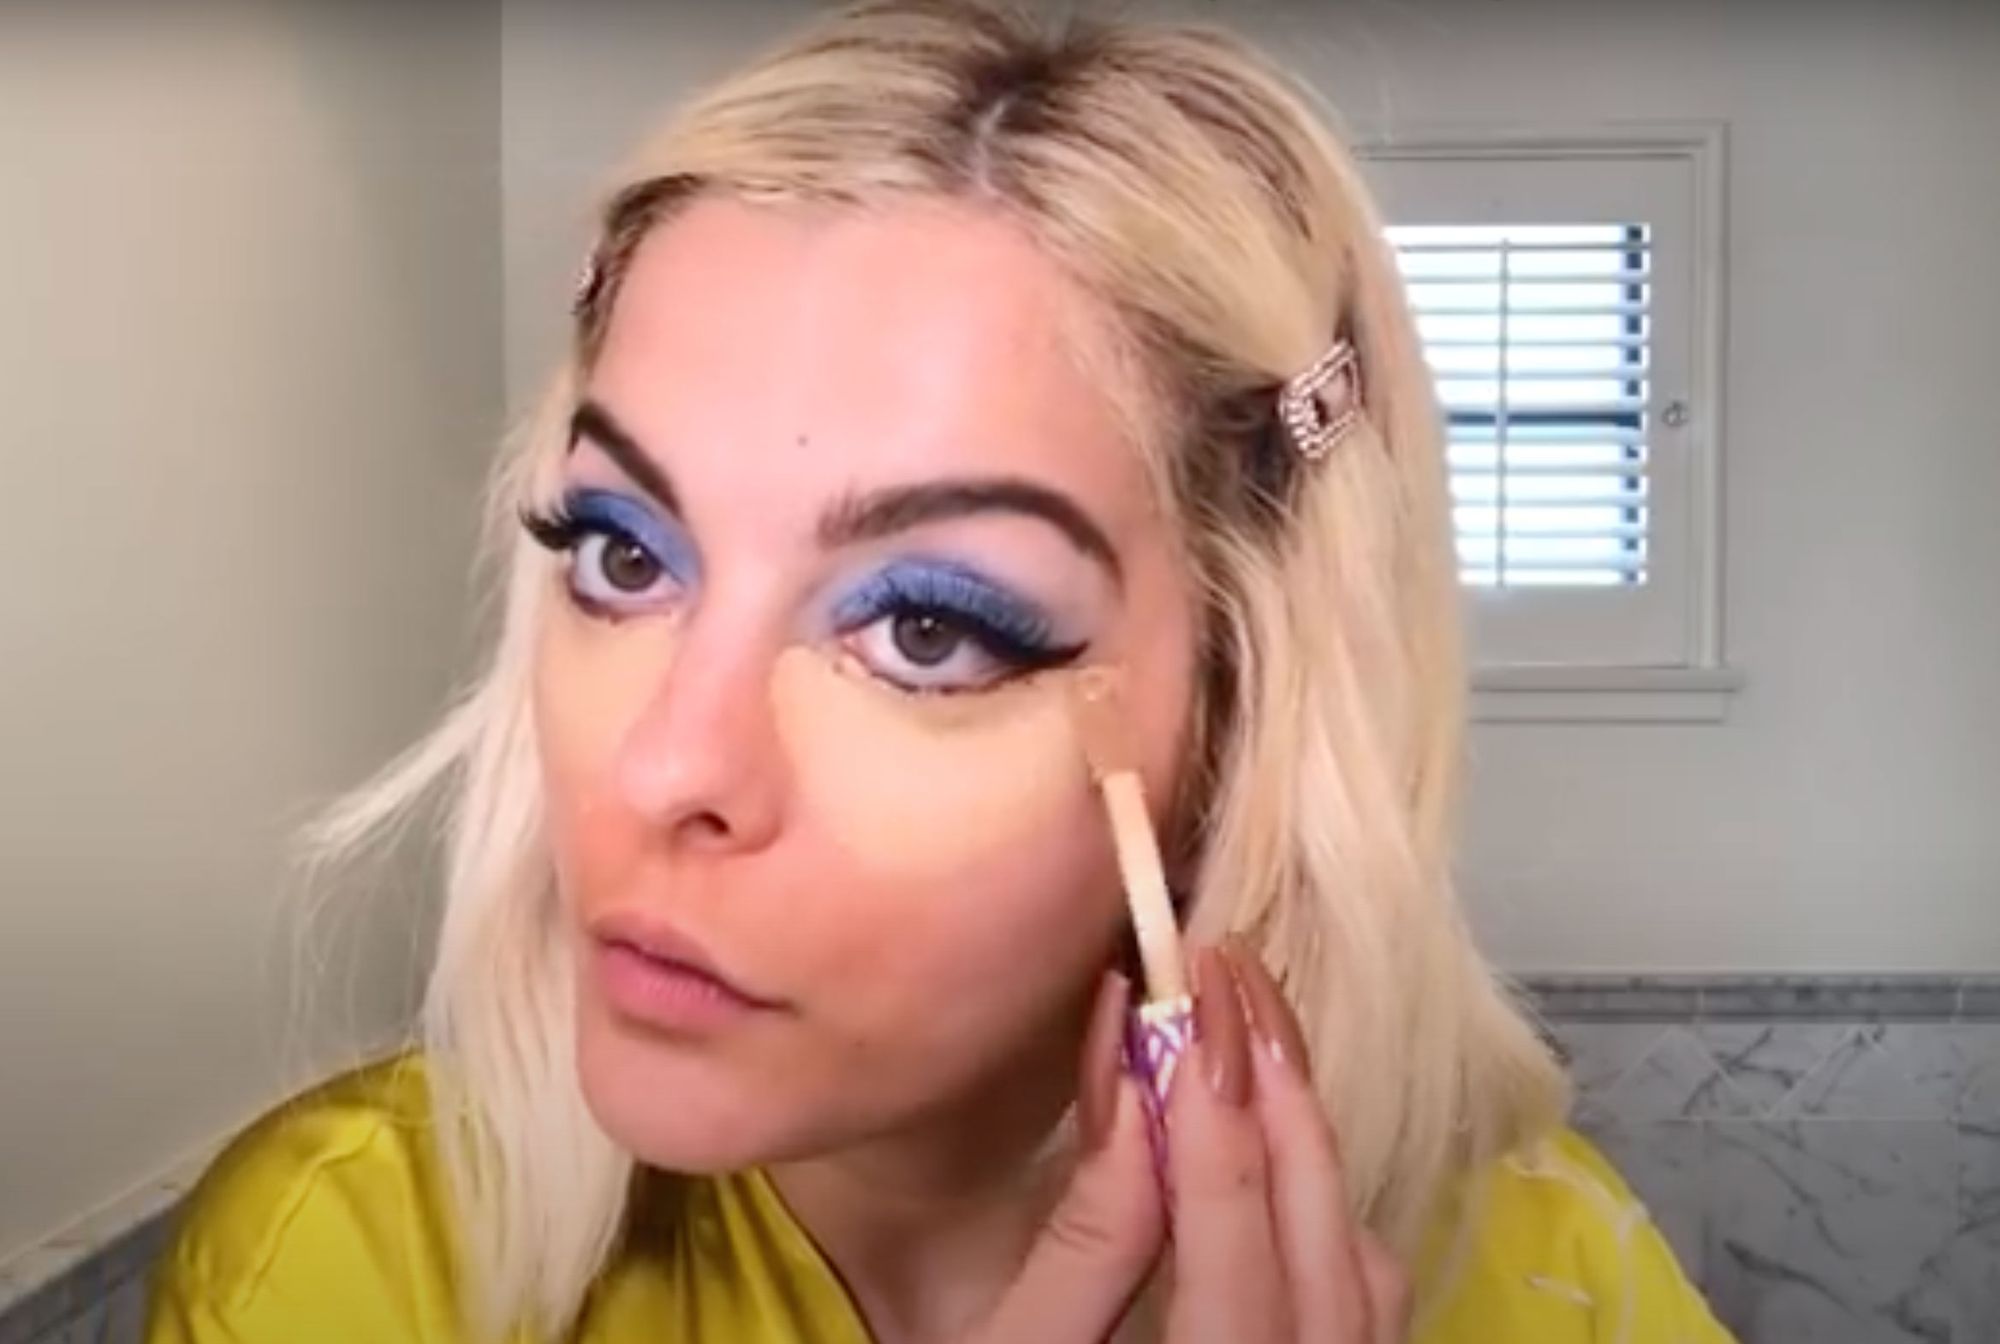 Watch Bebe Rexha Cover Her Dark Circles—It’s Literally The Most Relatable Thing!